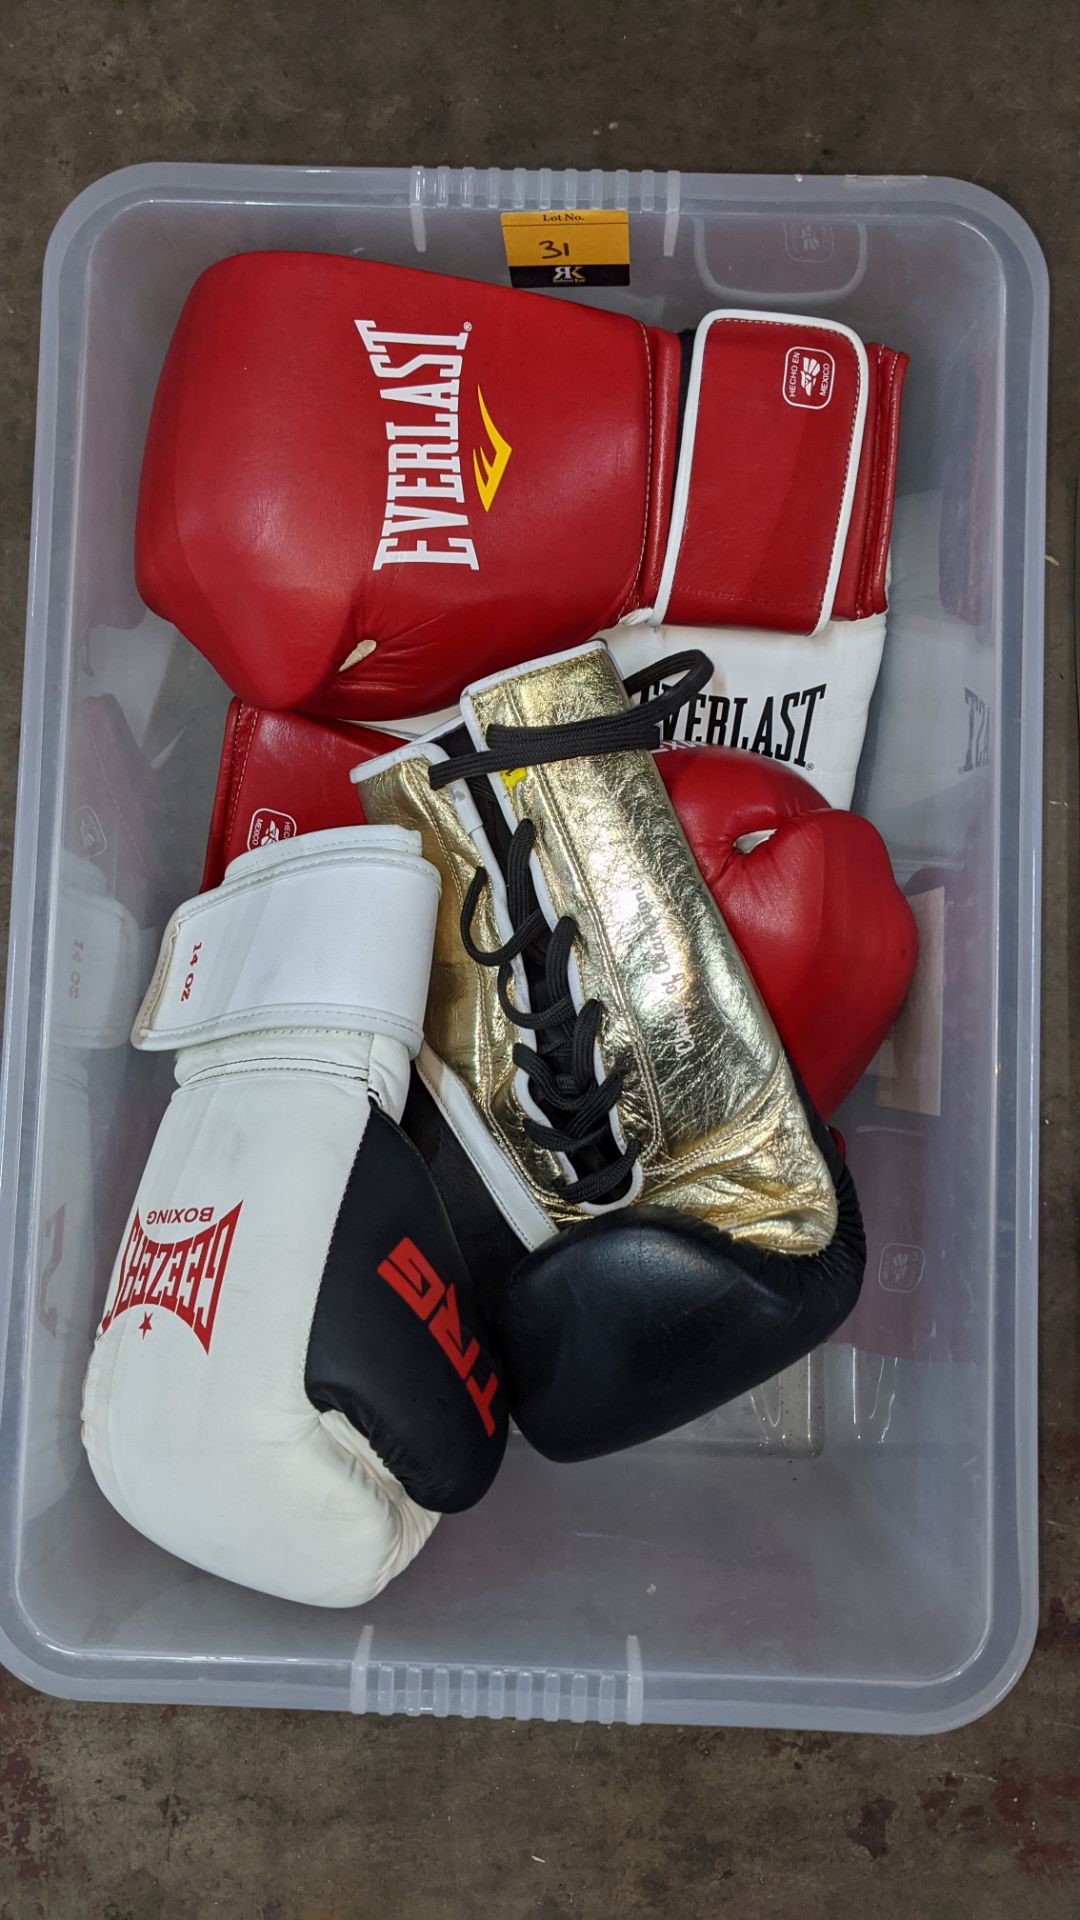 7 assorted Everlast boxing gloves, mostly right-handed - these gloves do not appear to form pairs - Image 2 of 5